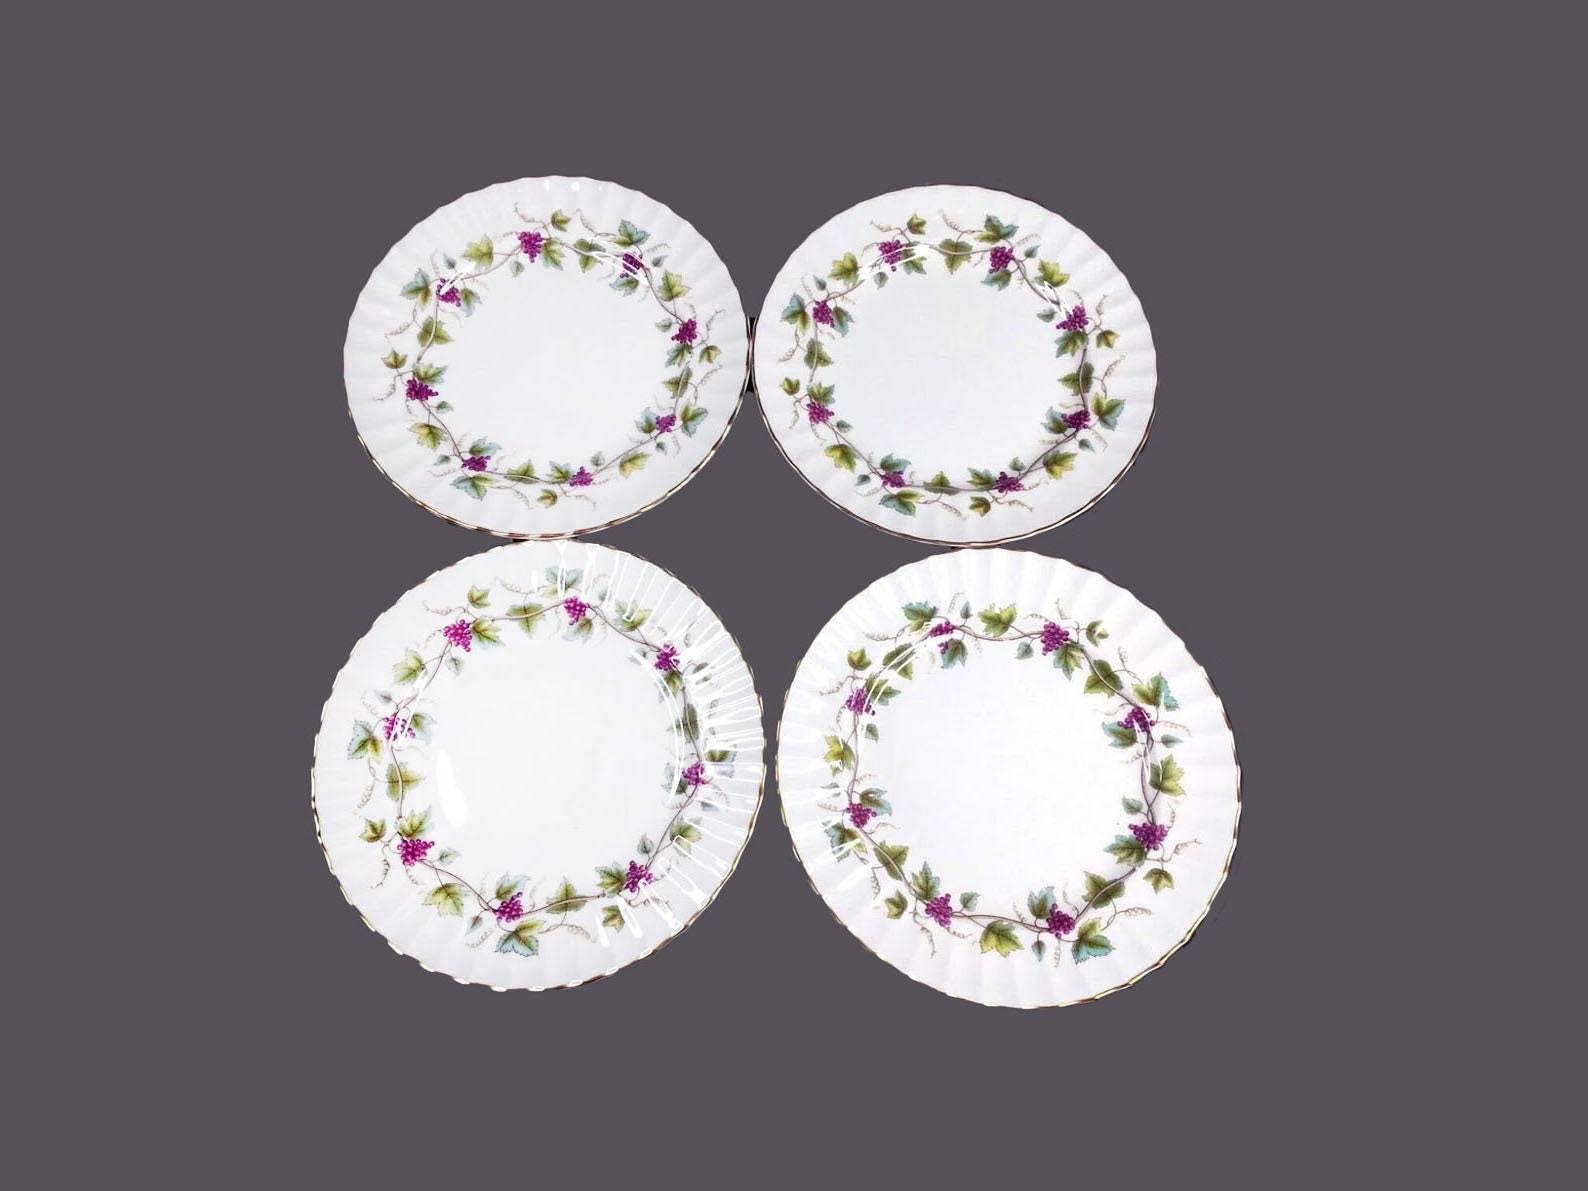 Royal Worcester Bacchanal White salad plates. Bone china made in England. - £36.19 GBP - £47.78 GBP